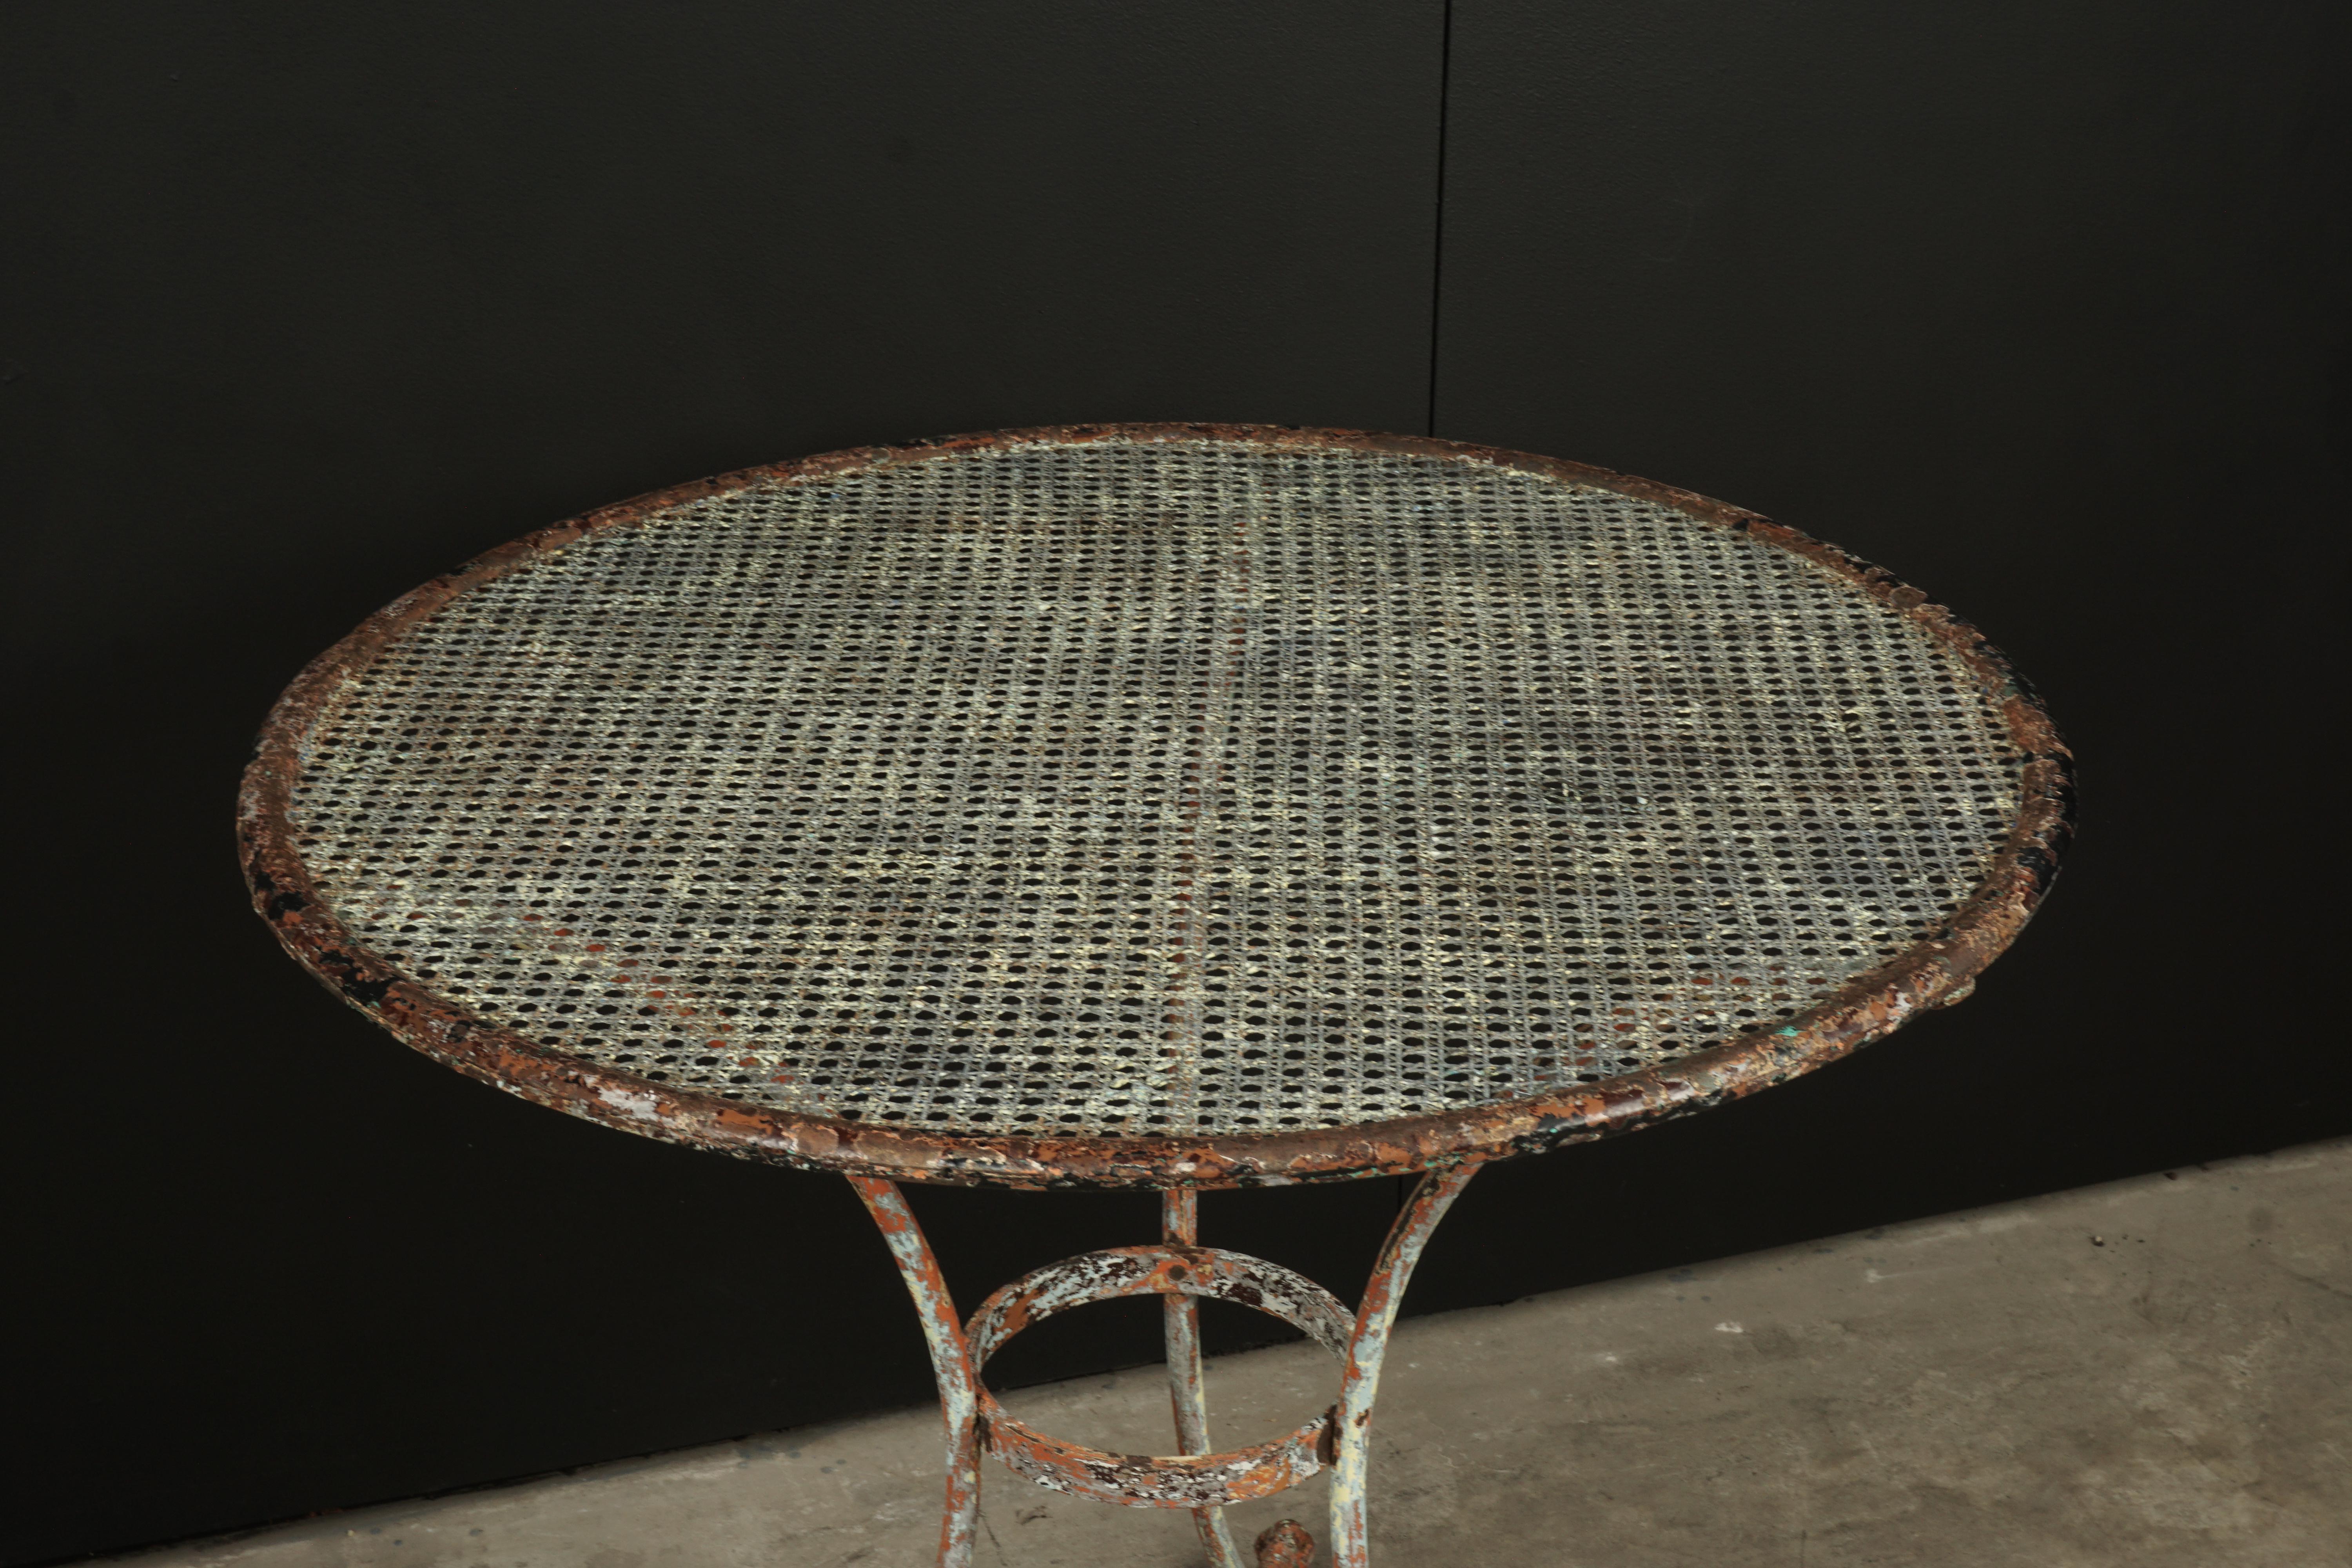 Vintage Bistro table from France, 1950s. Solid steel construction. Fantastic original color and patina.